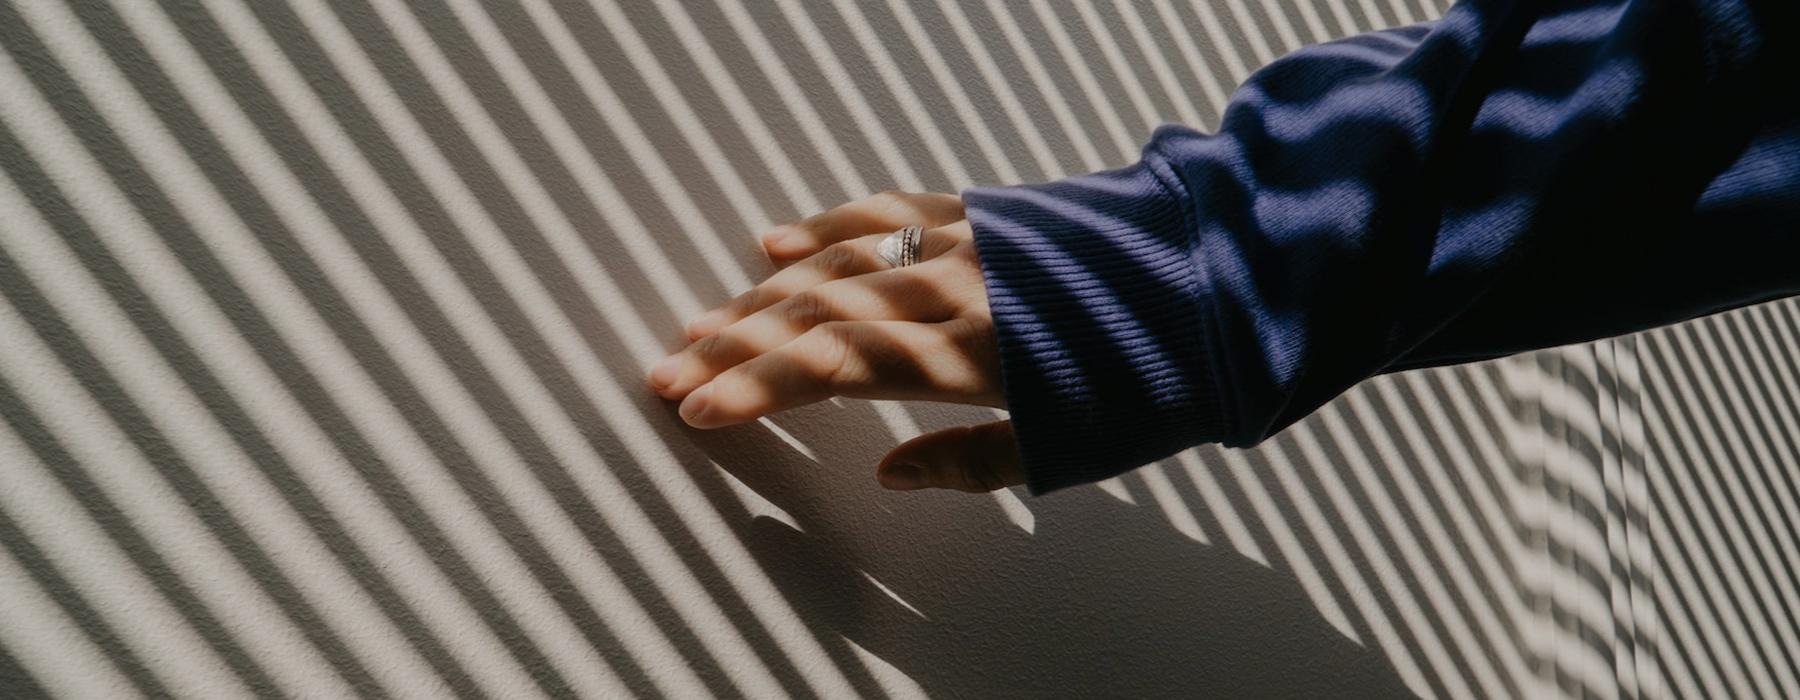 a person's hand on a striped surface